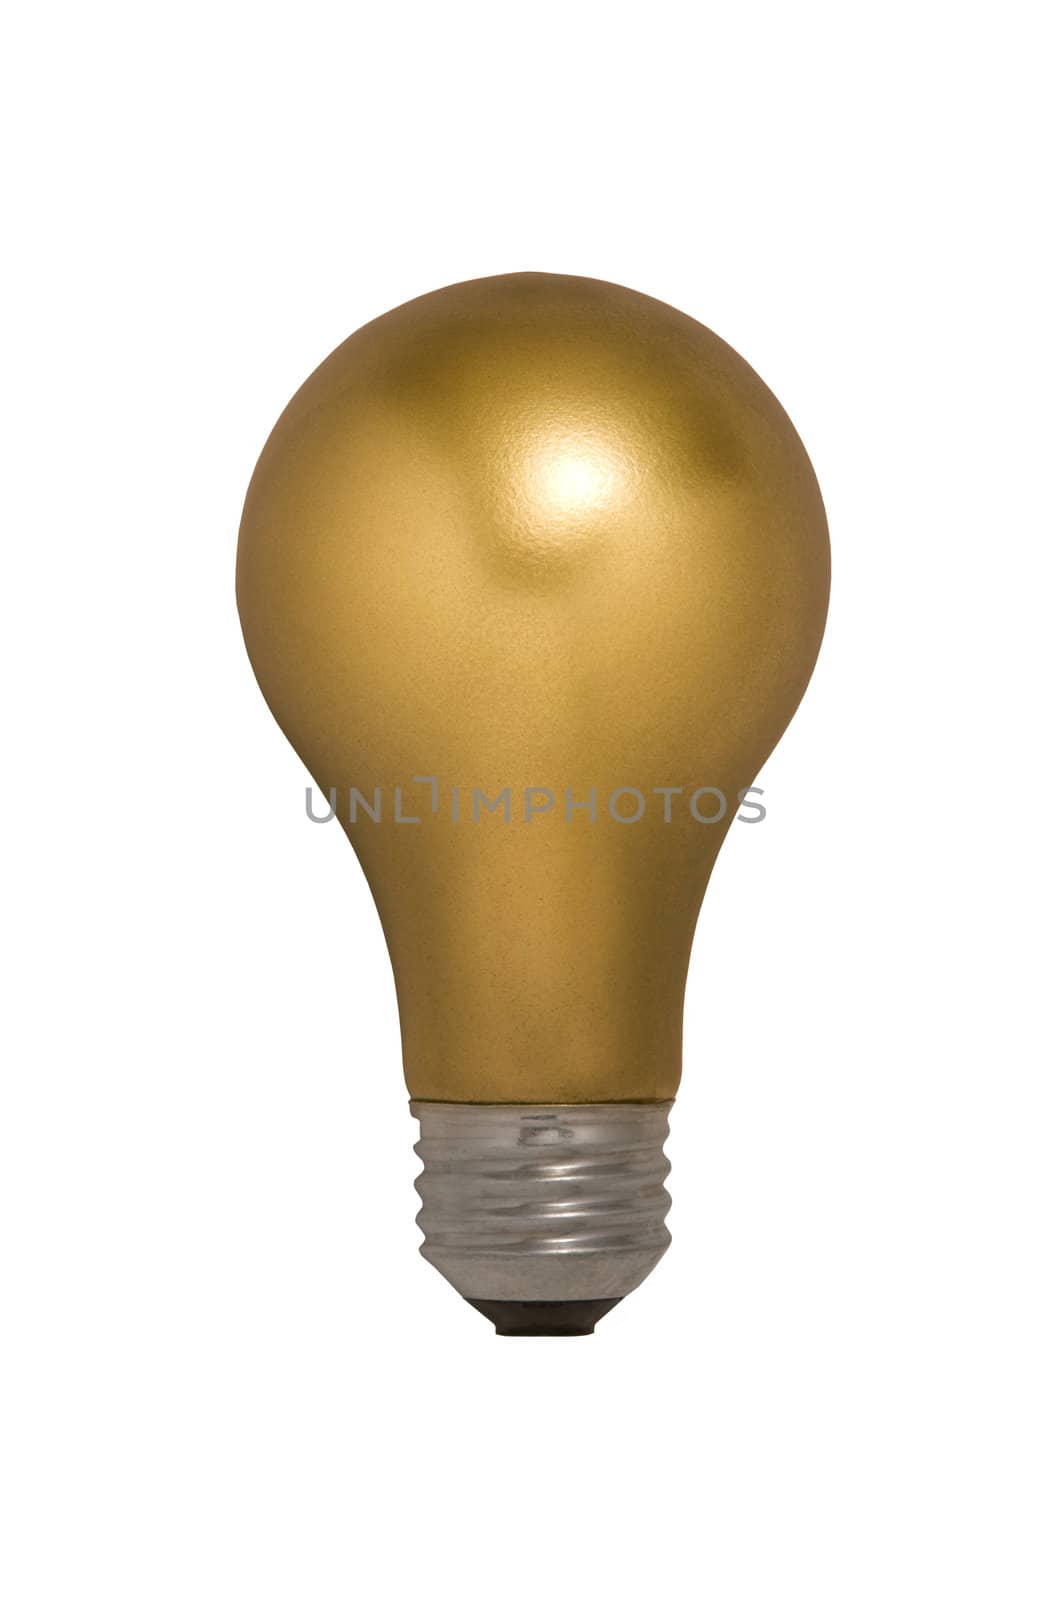 Gold Light Bulb Floating Against a White Background